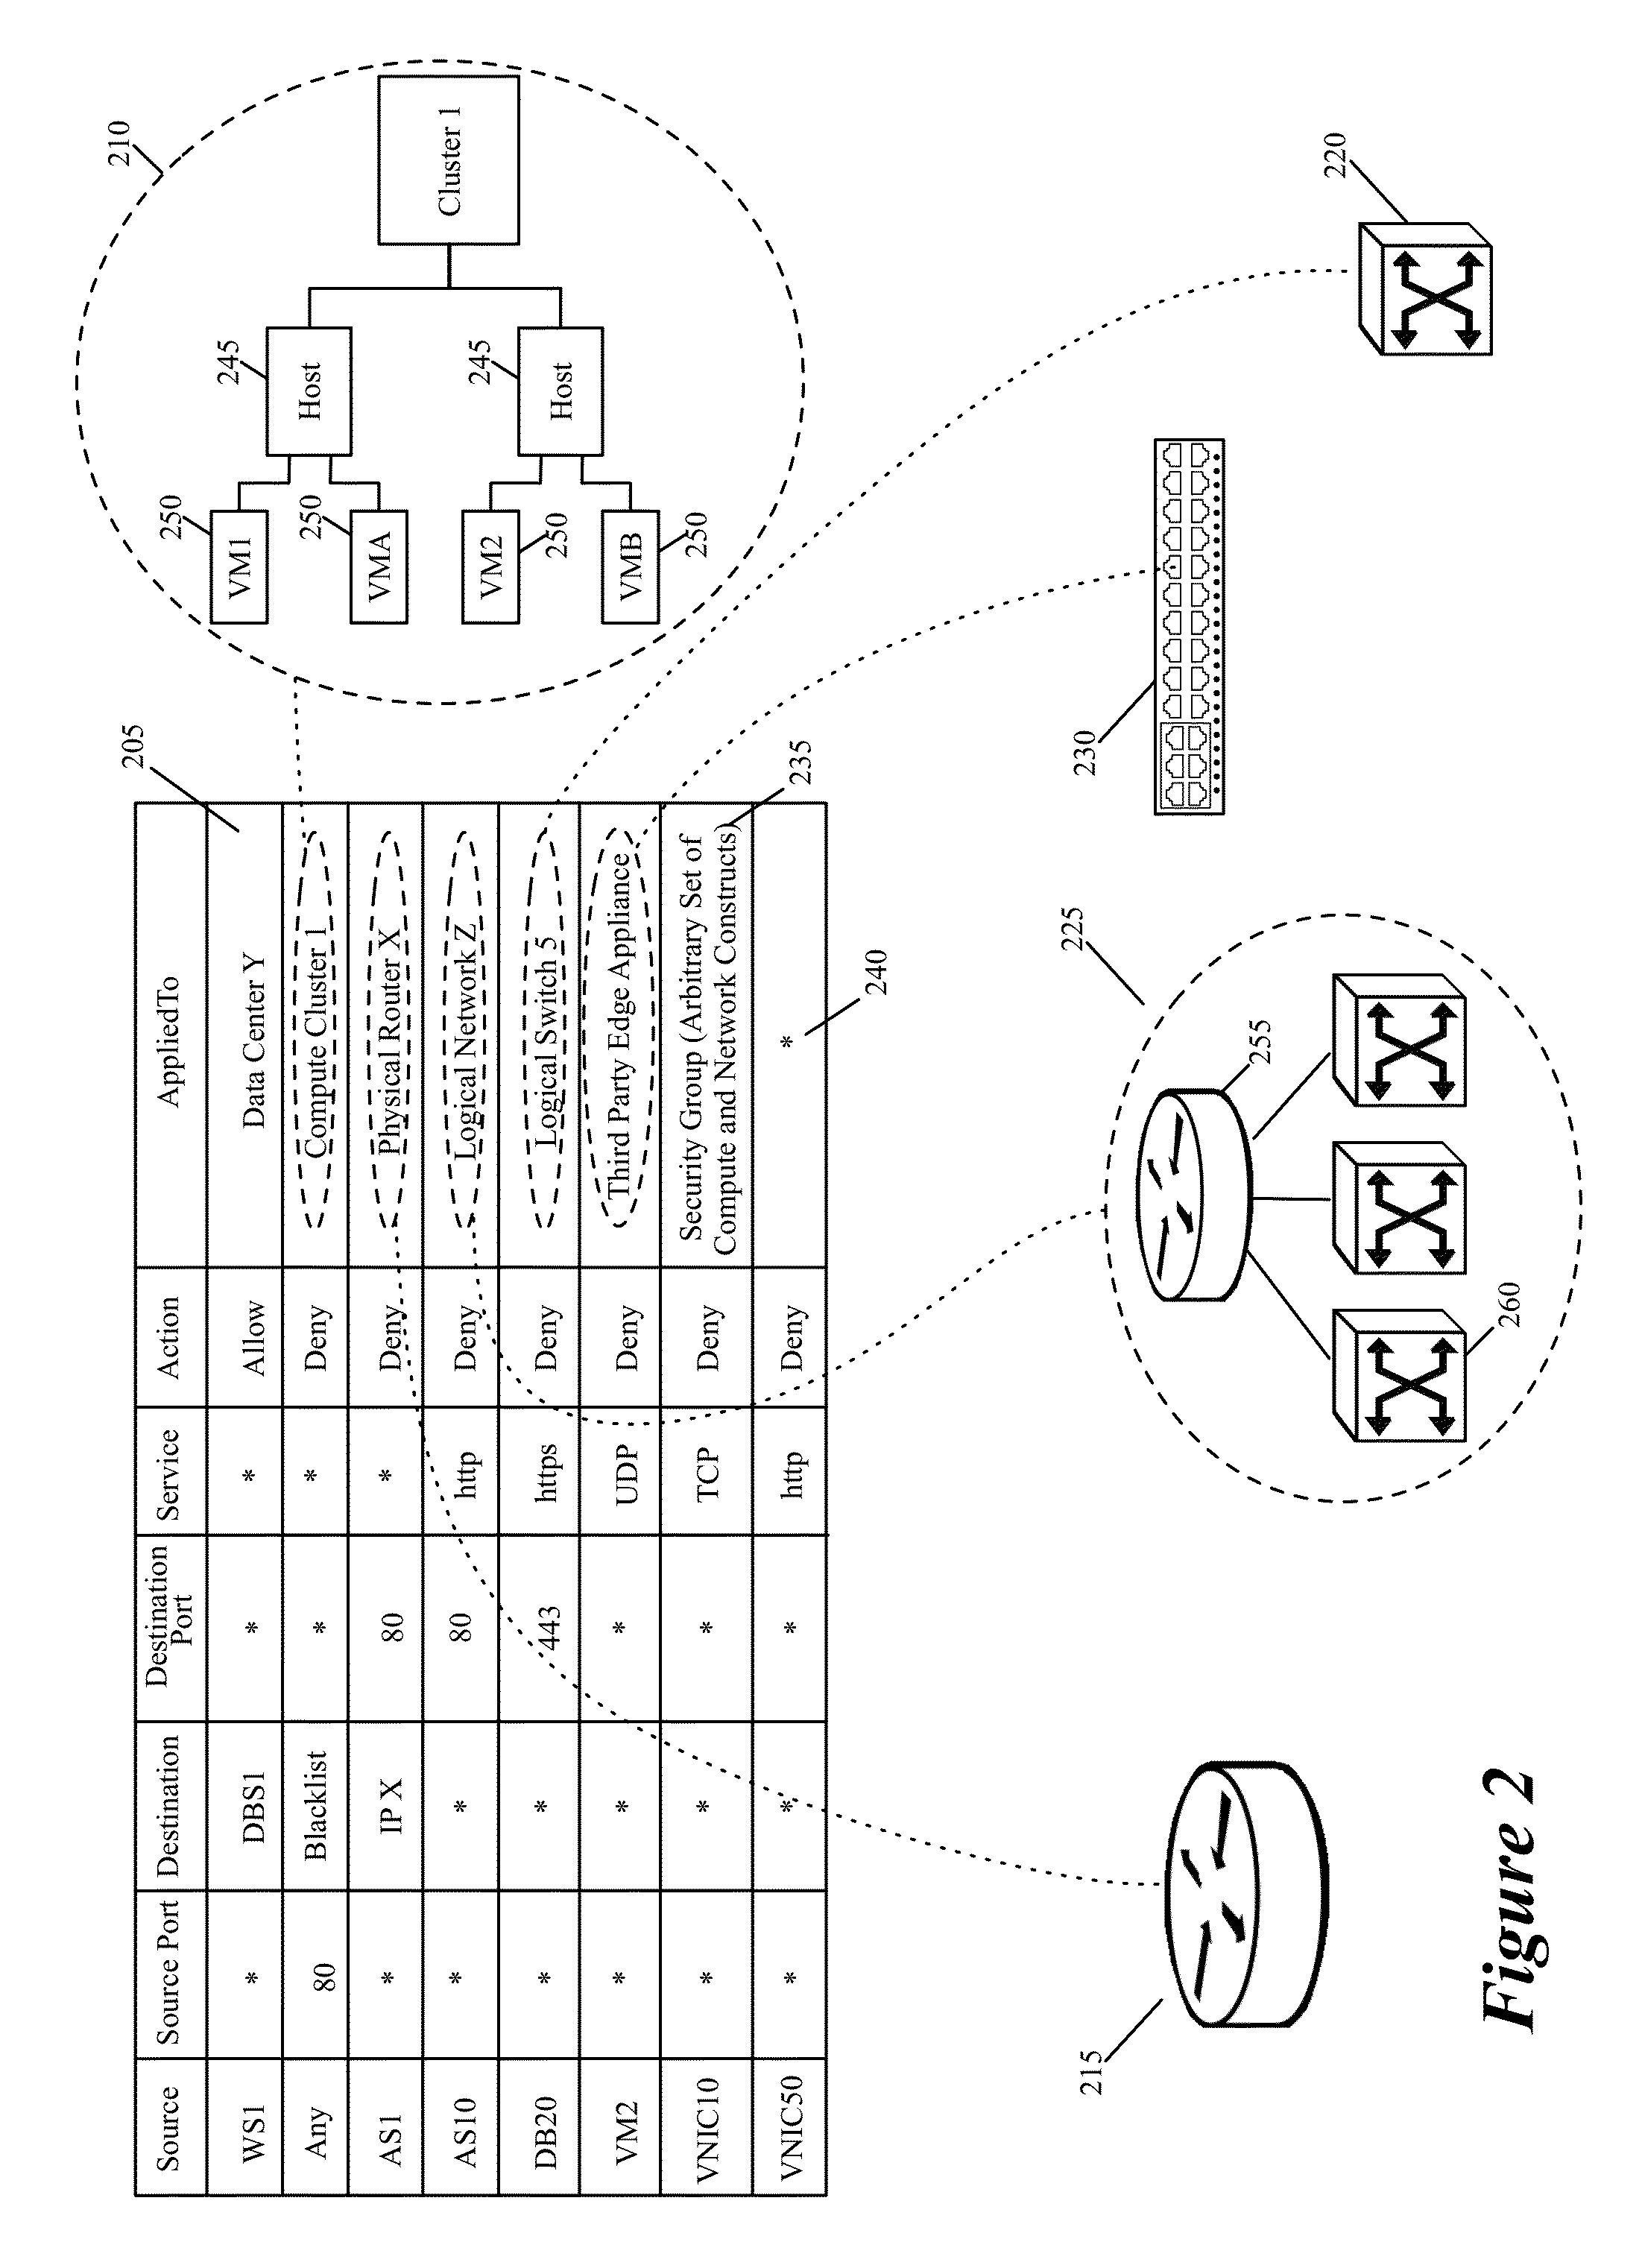 Method and apparatus for distributing firewall rules